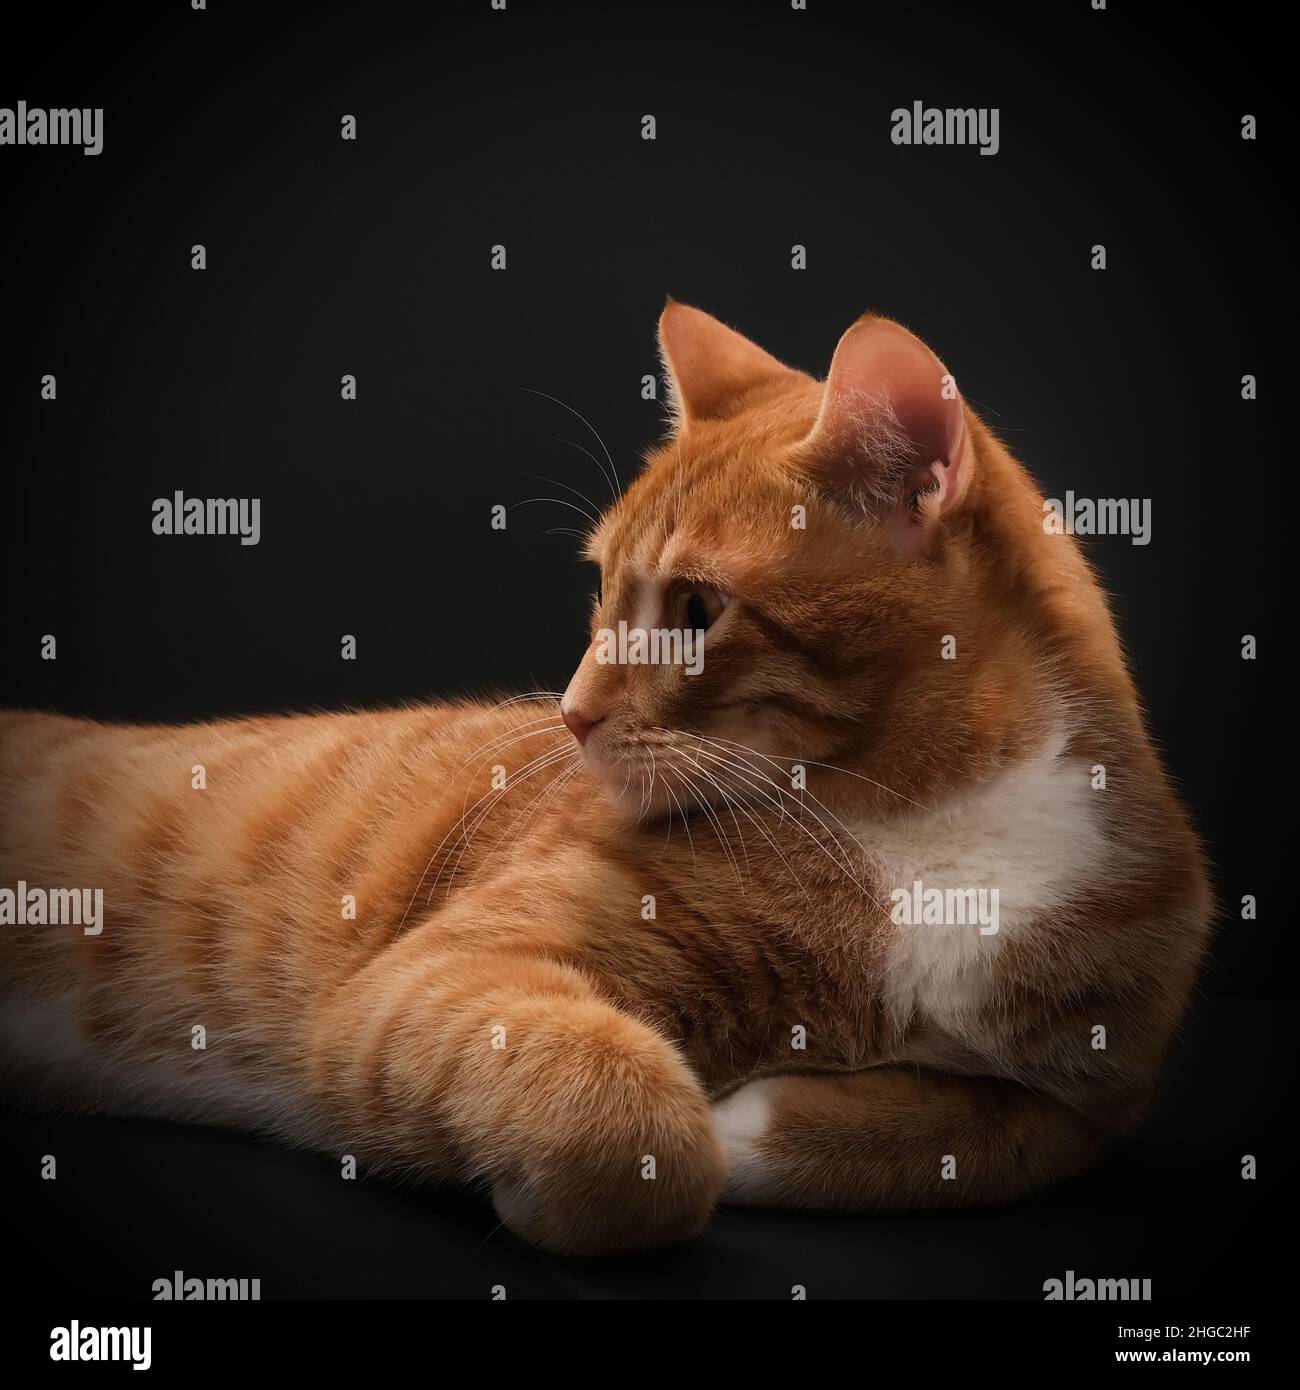 Portrait of young honorable arab ginger tabby cat close up on black background,side view.Pets. Stock Photo